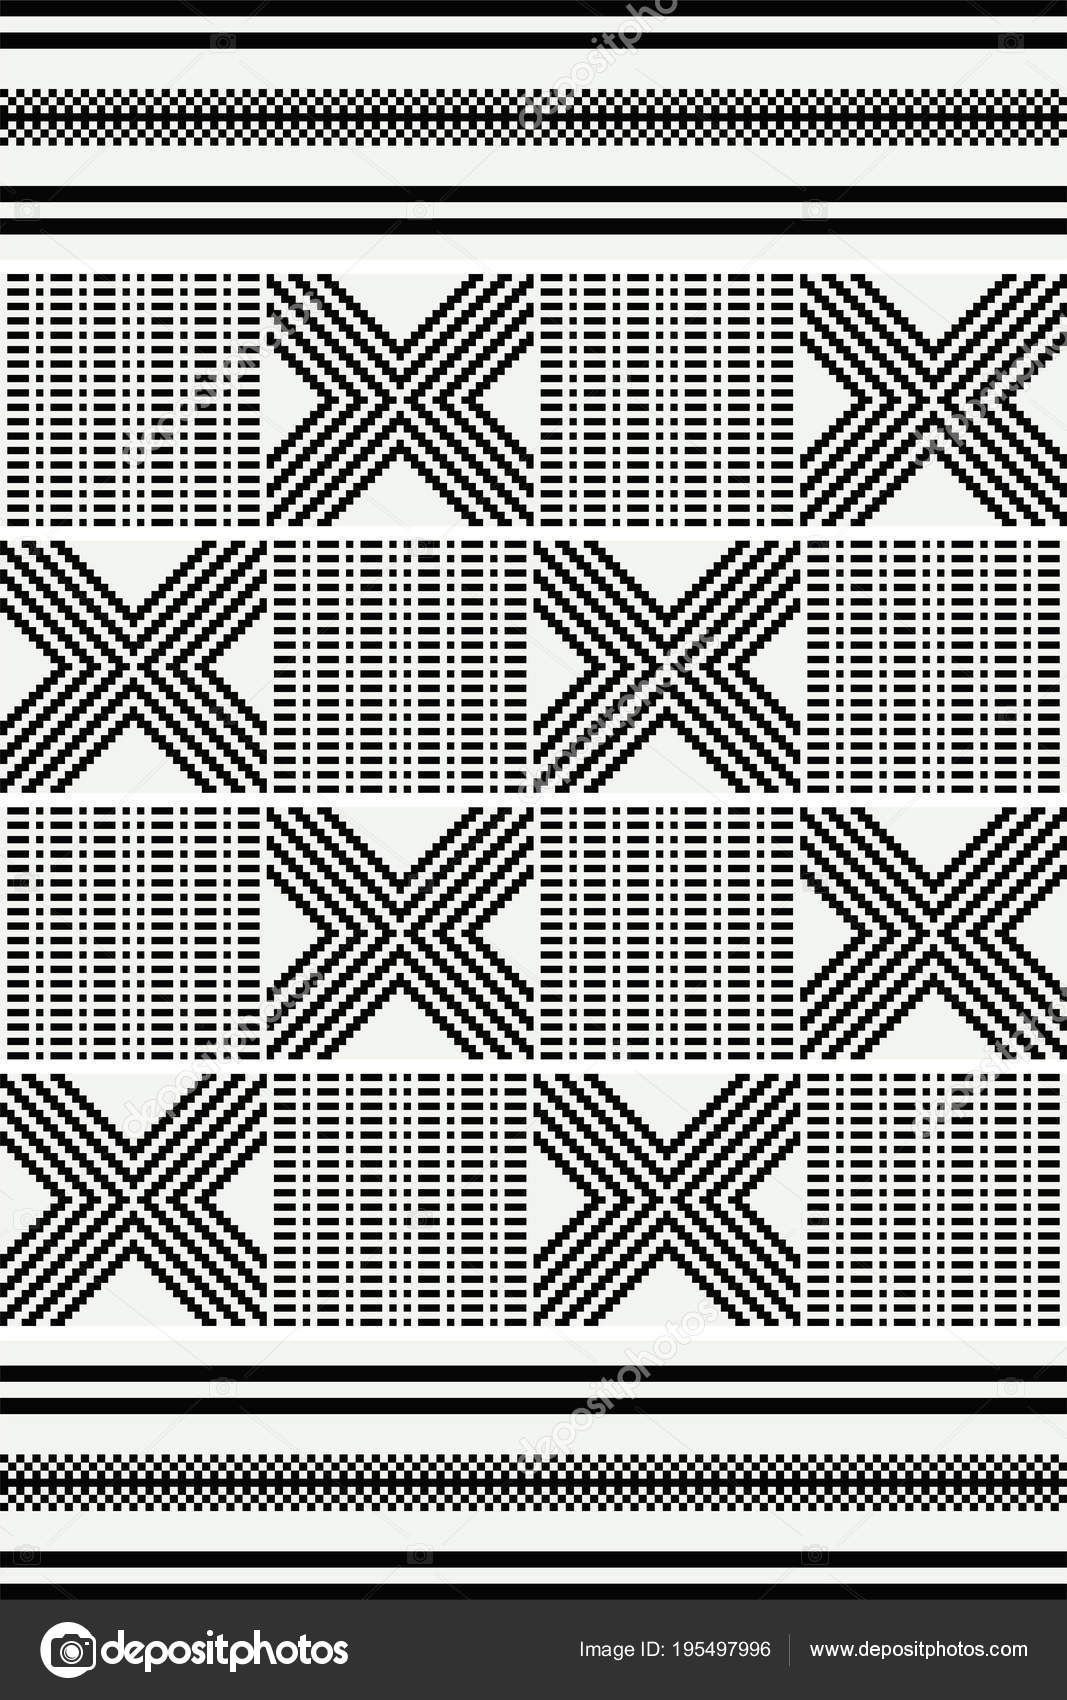 Featured image of post Kente Cloth Patterns Black And White - The patterns are created during the hand weaving process and are determined by the manner in which the threads are intertwined.